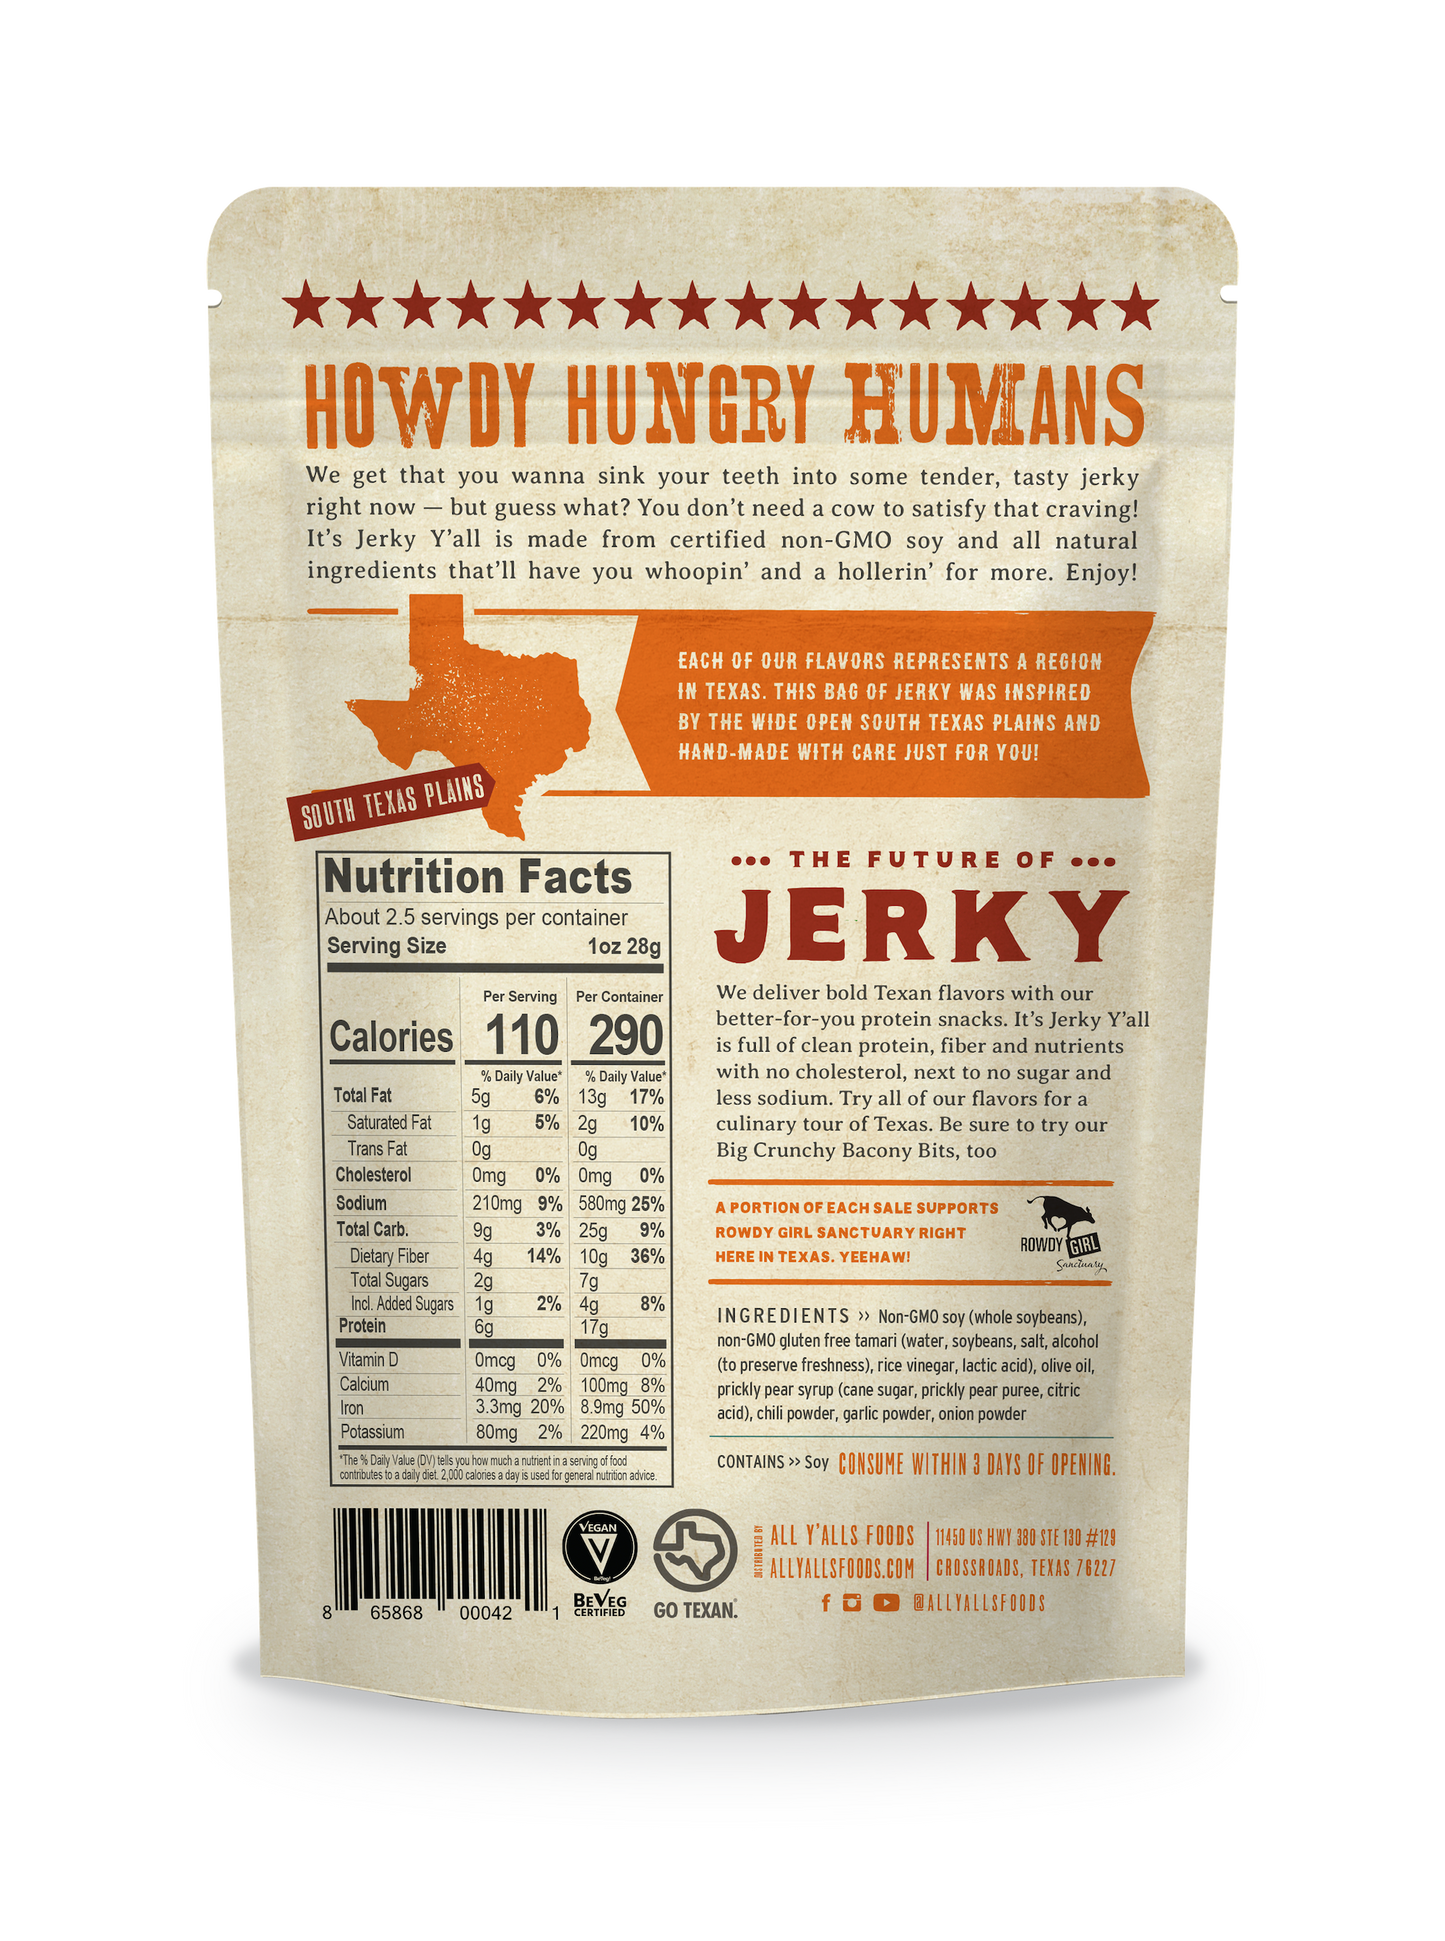 All Flavors Jerky & Bacony Bits (5-Pack)